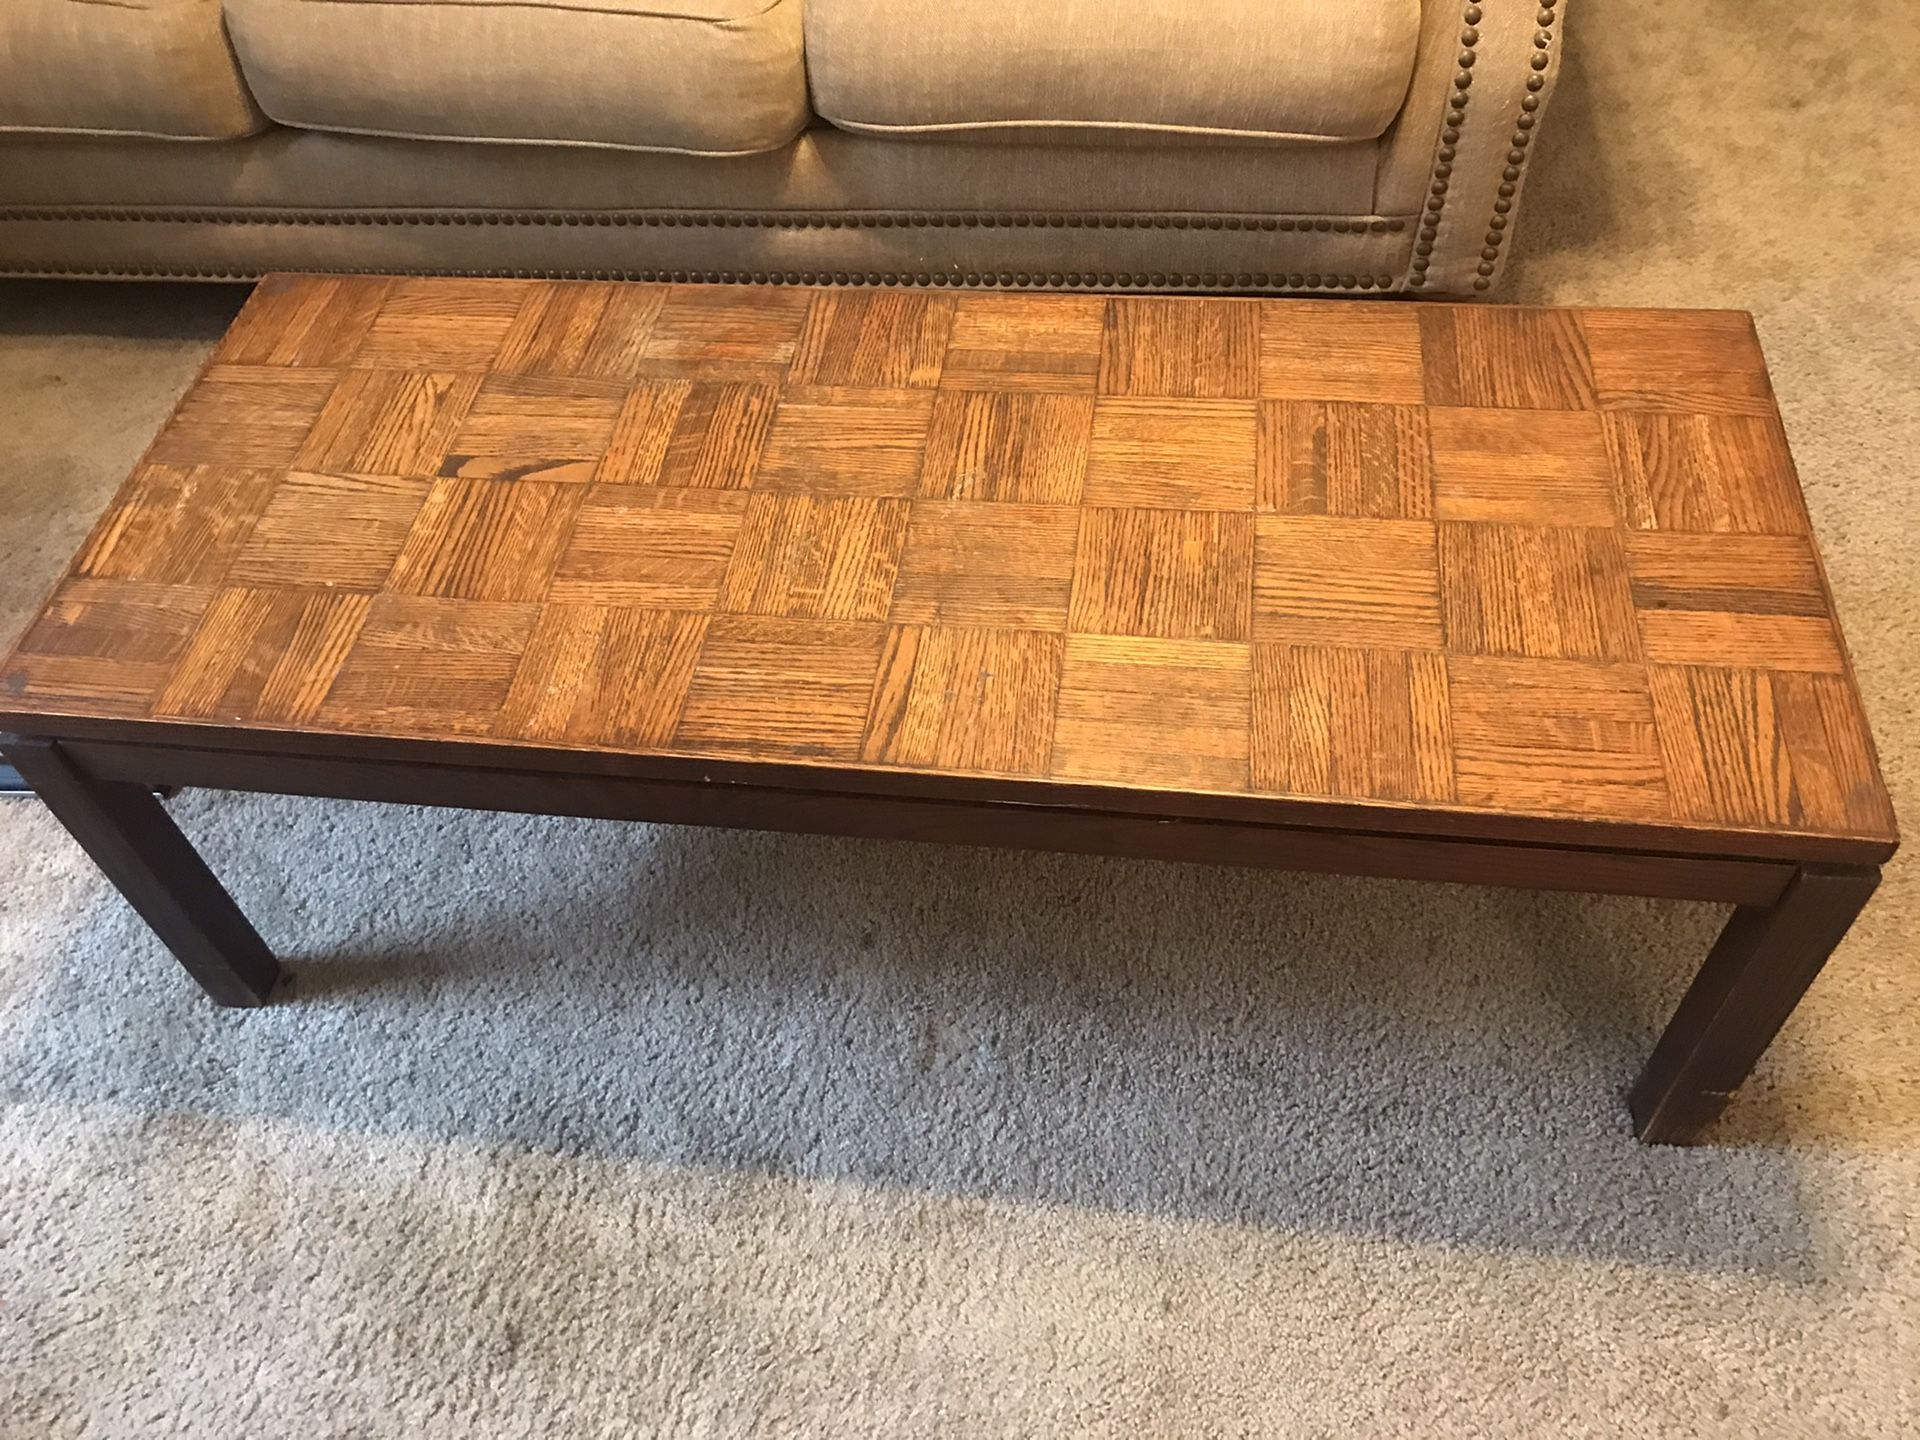 Coffee table with side tables and lamps